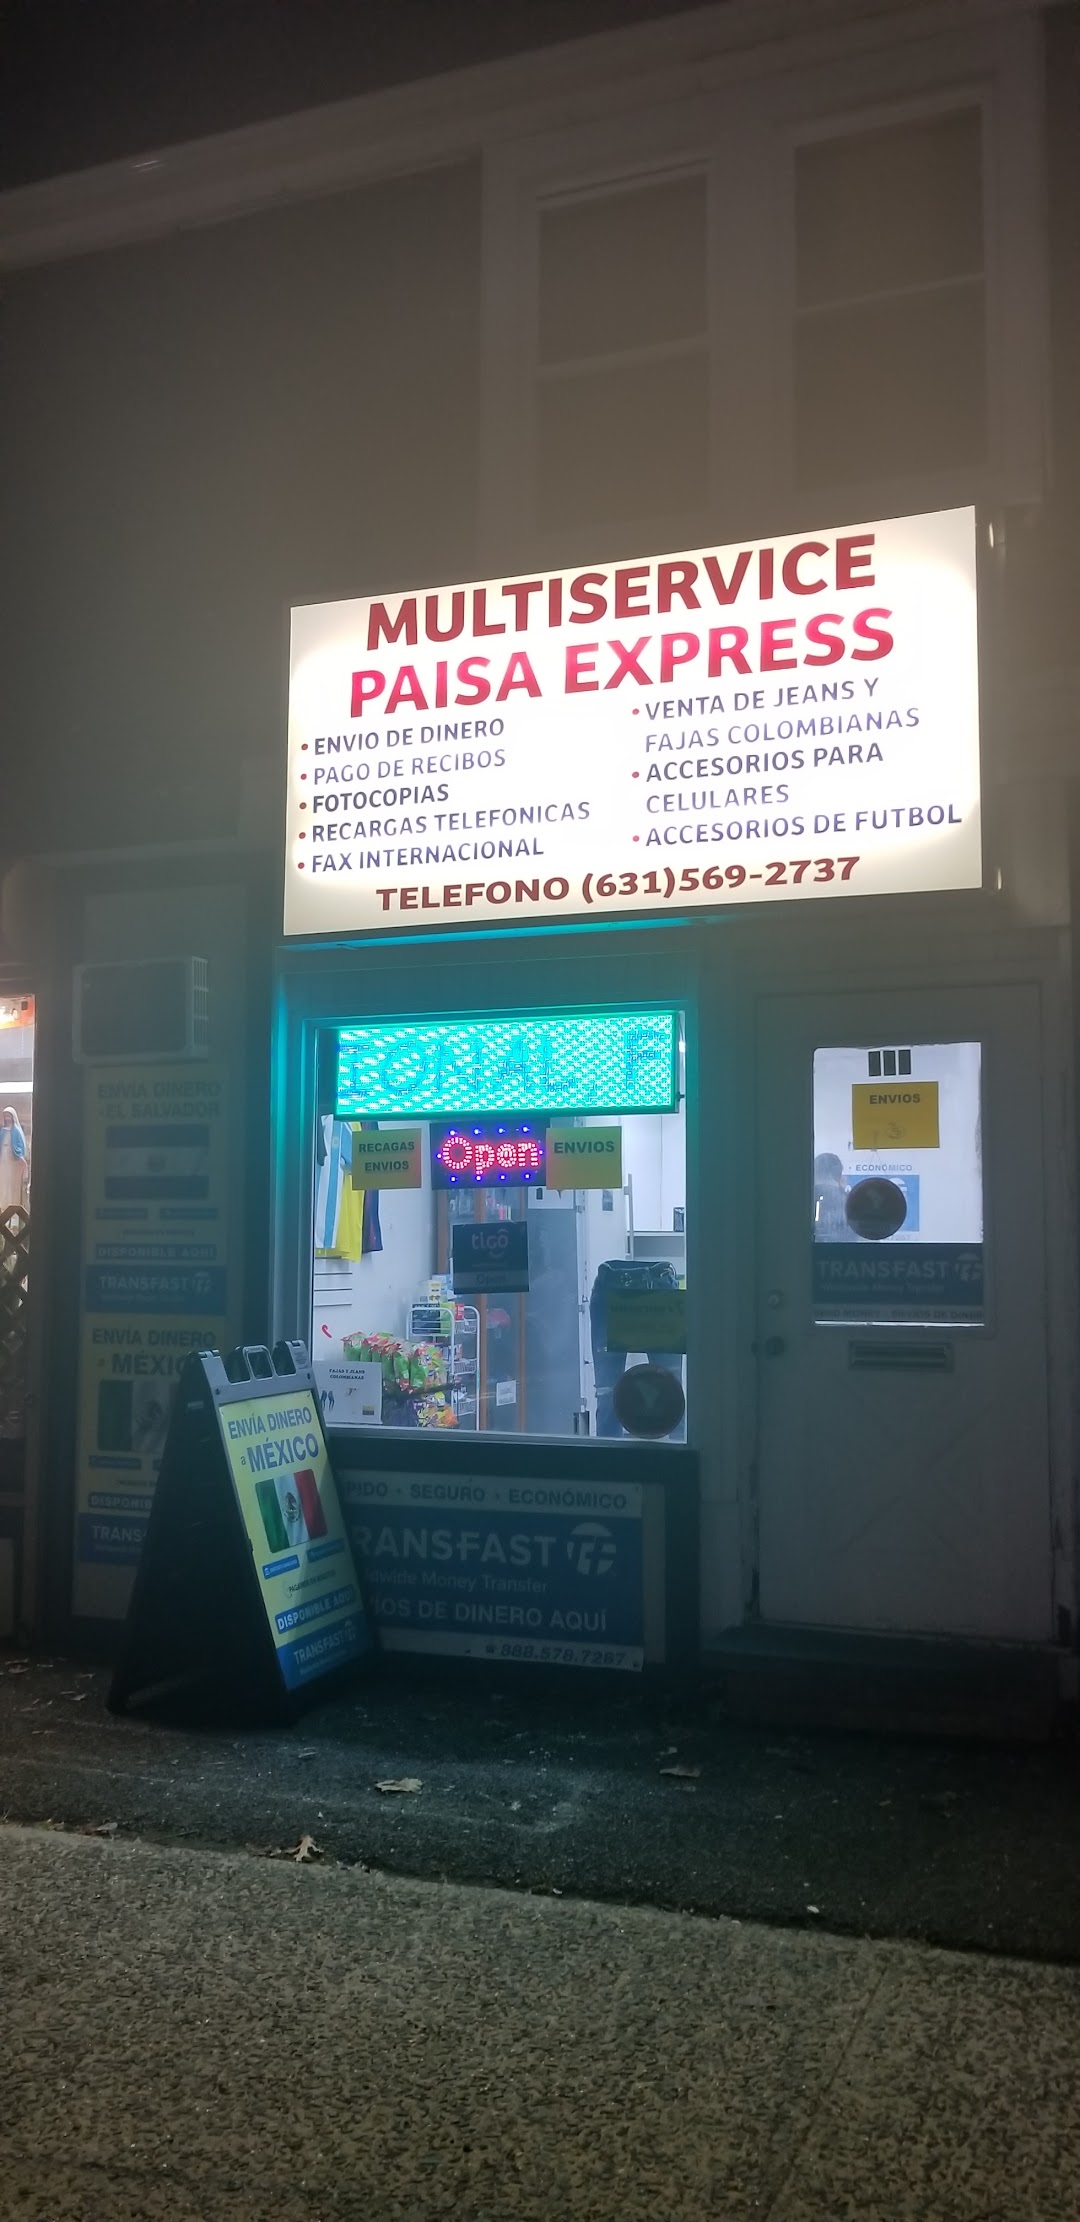 MULTISERVICES PAISA EXPRESS